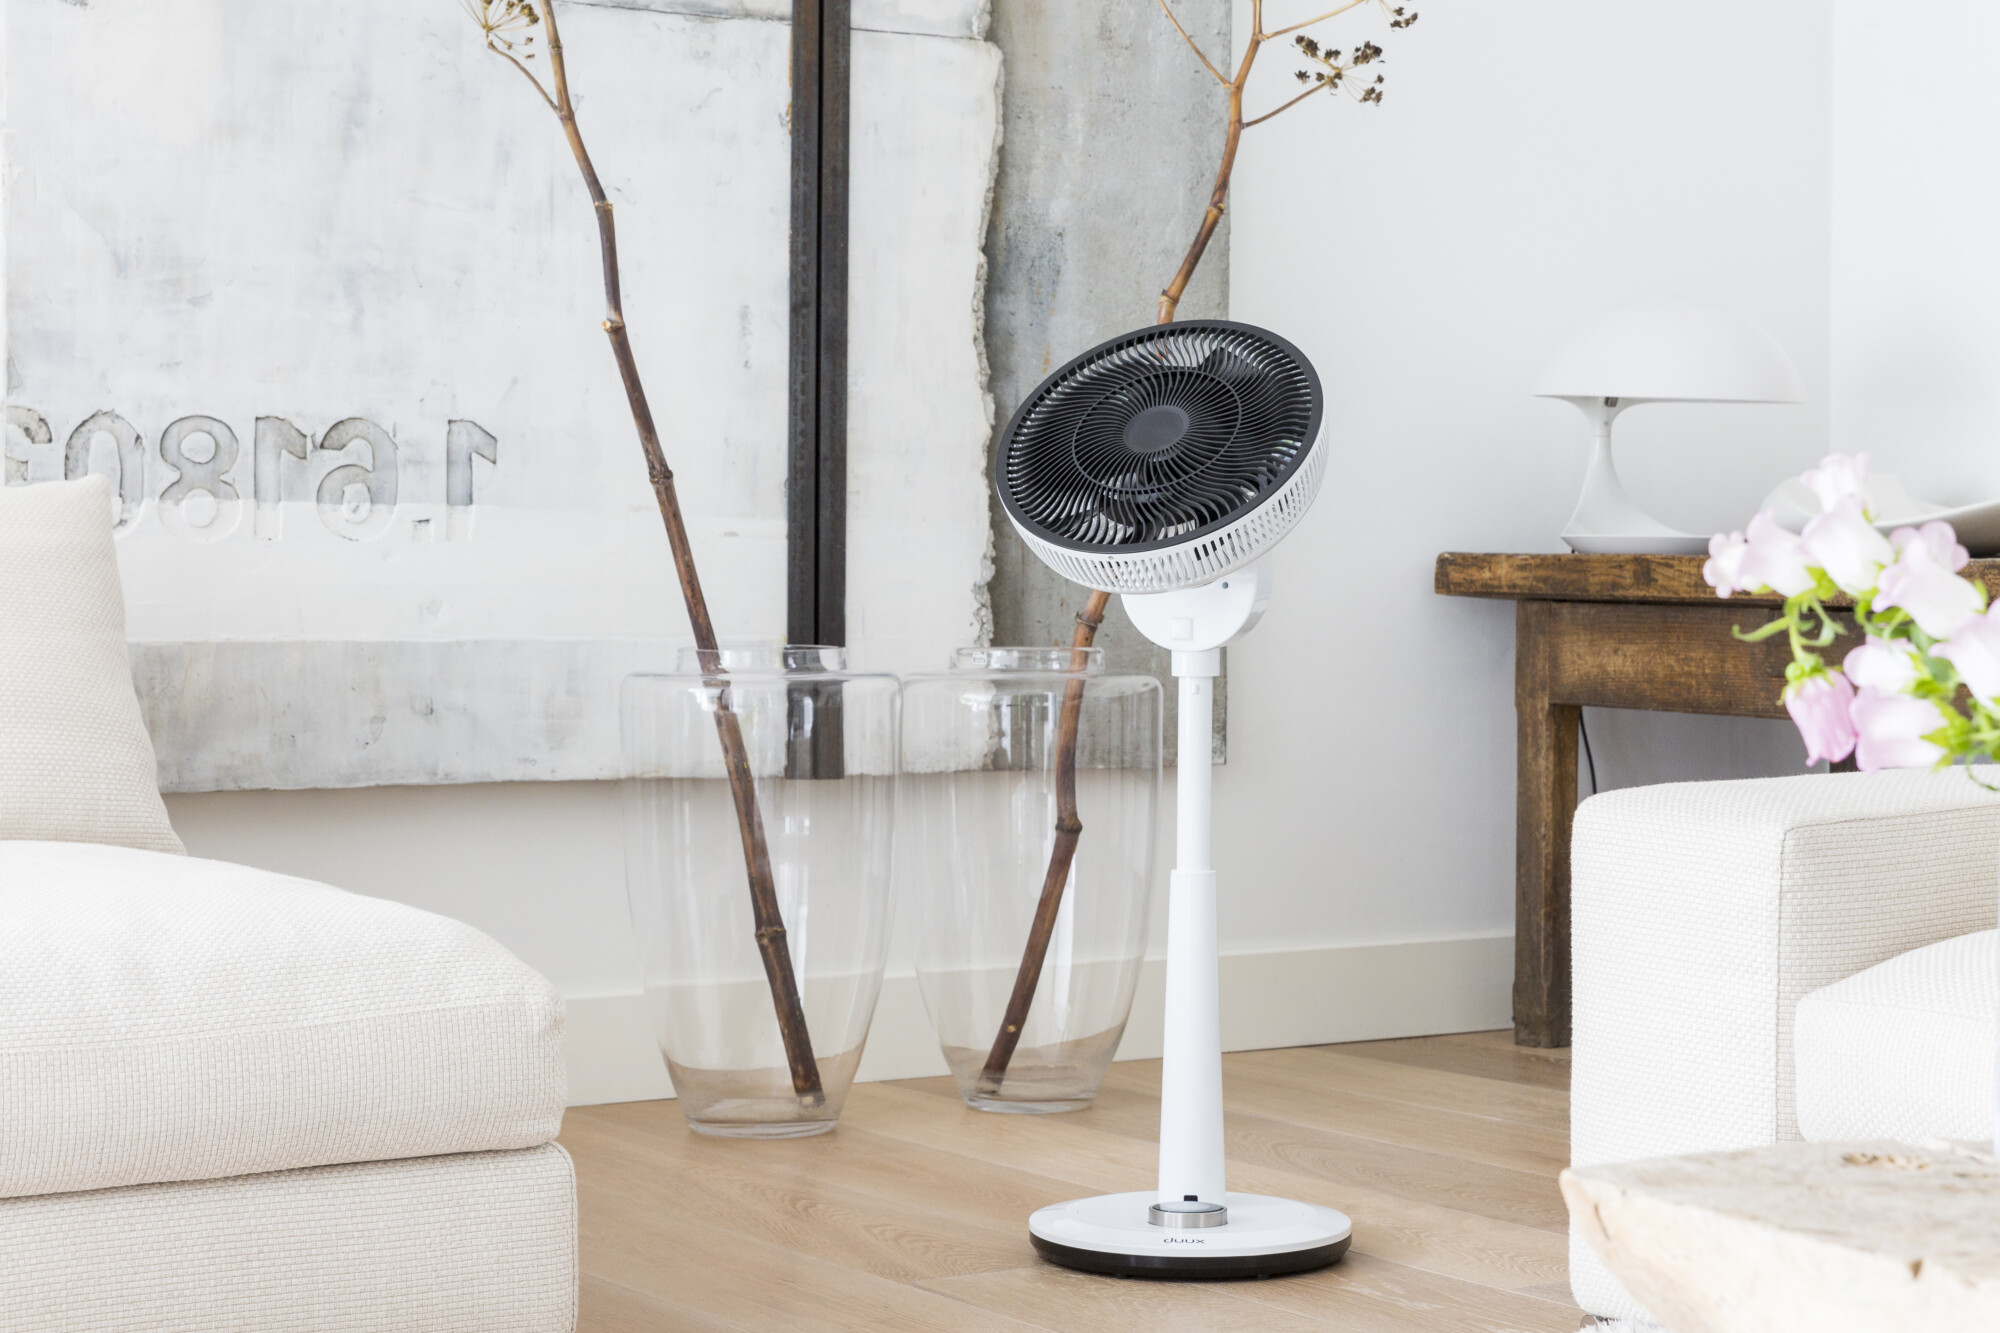 The Whisper Fan from Duux in White operates with a whisper-quiet sound, yet delivers a range of airflow strengths from a gentle breeze to a strong gust of wind. 